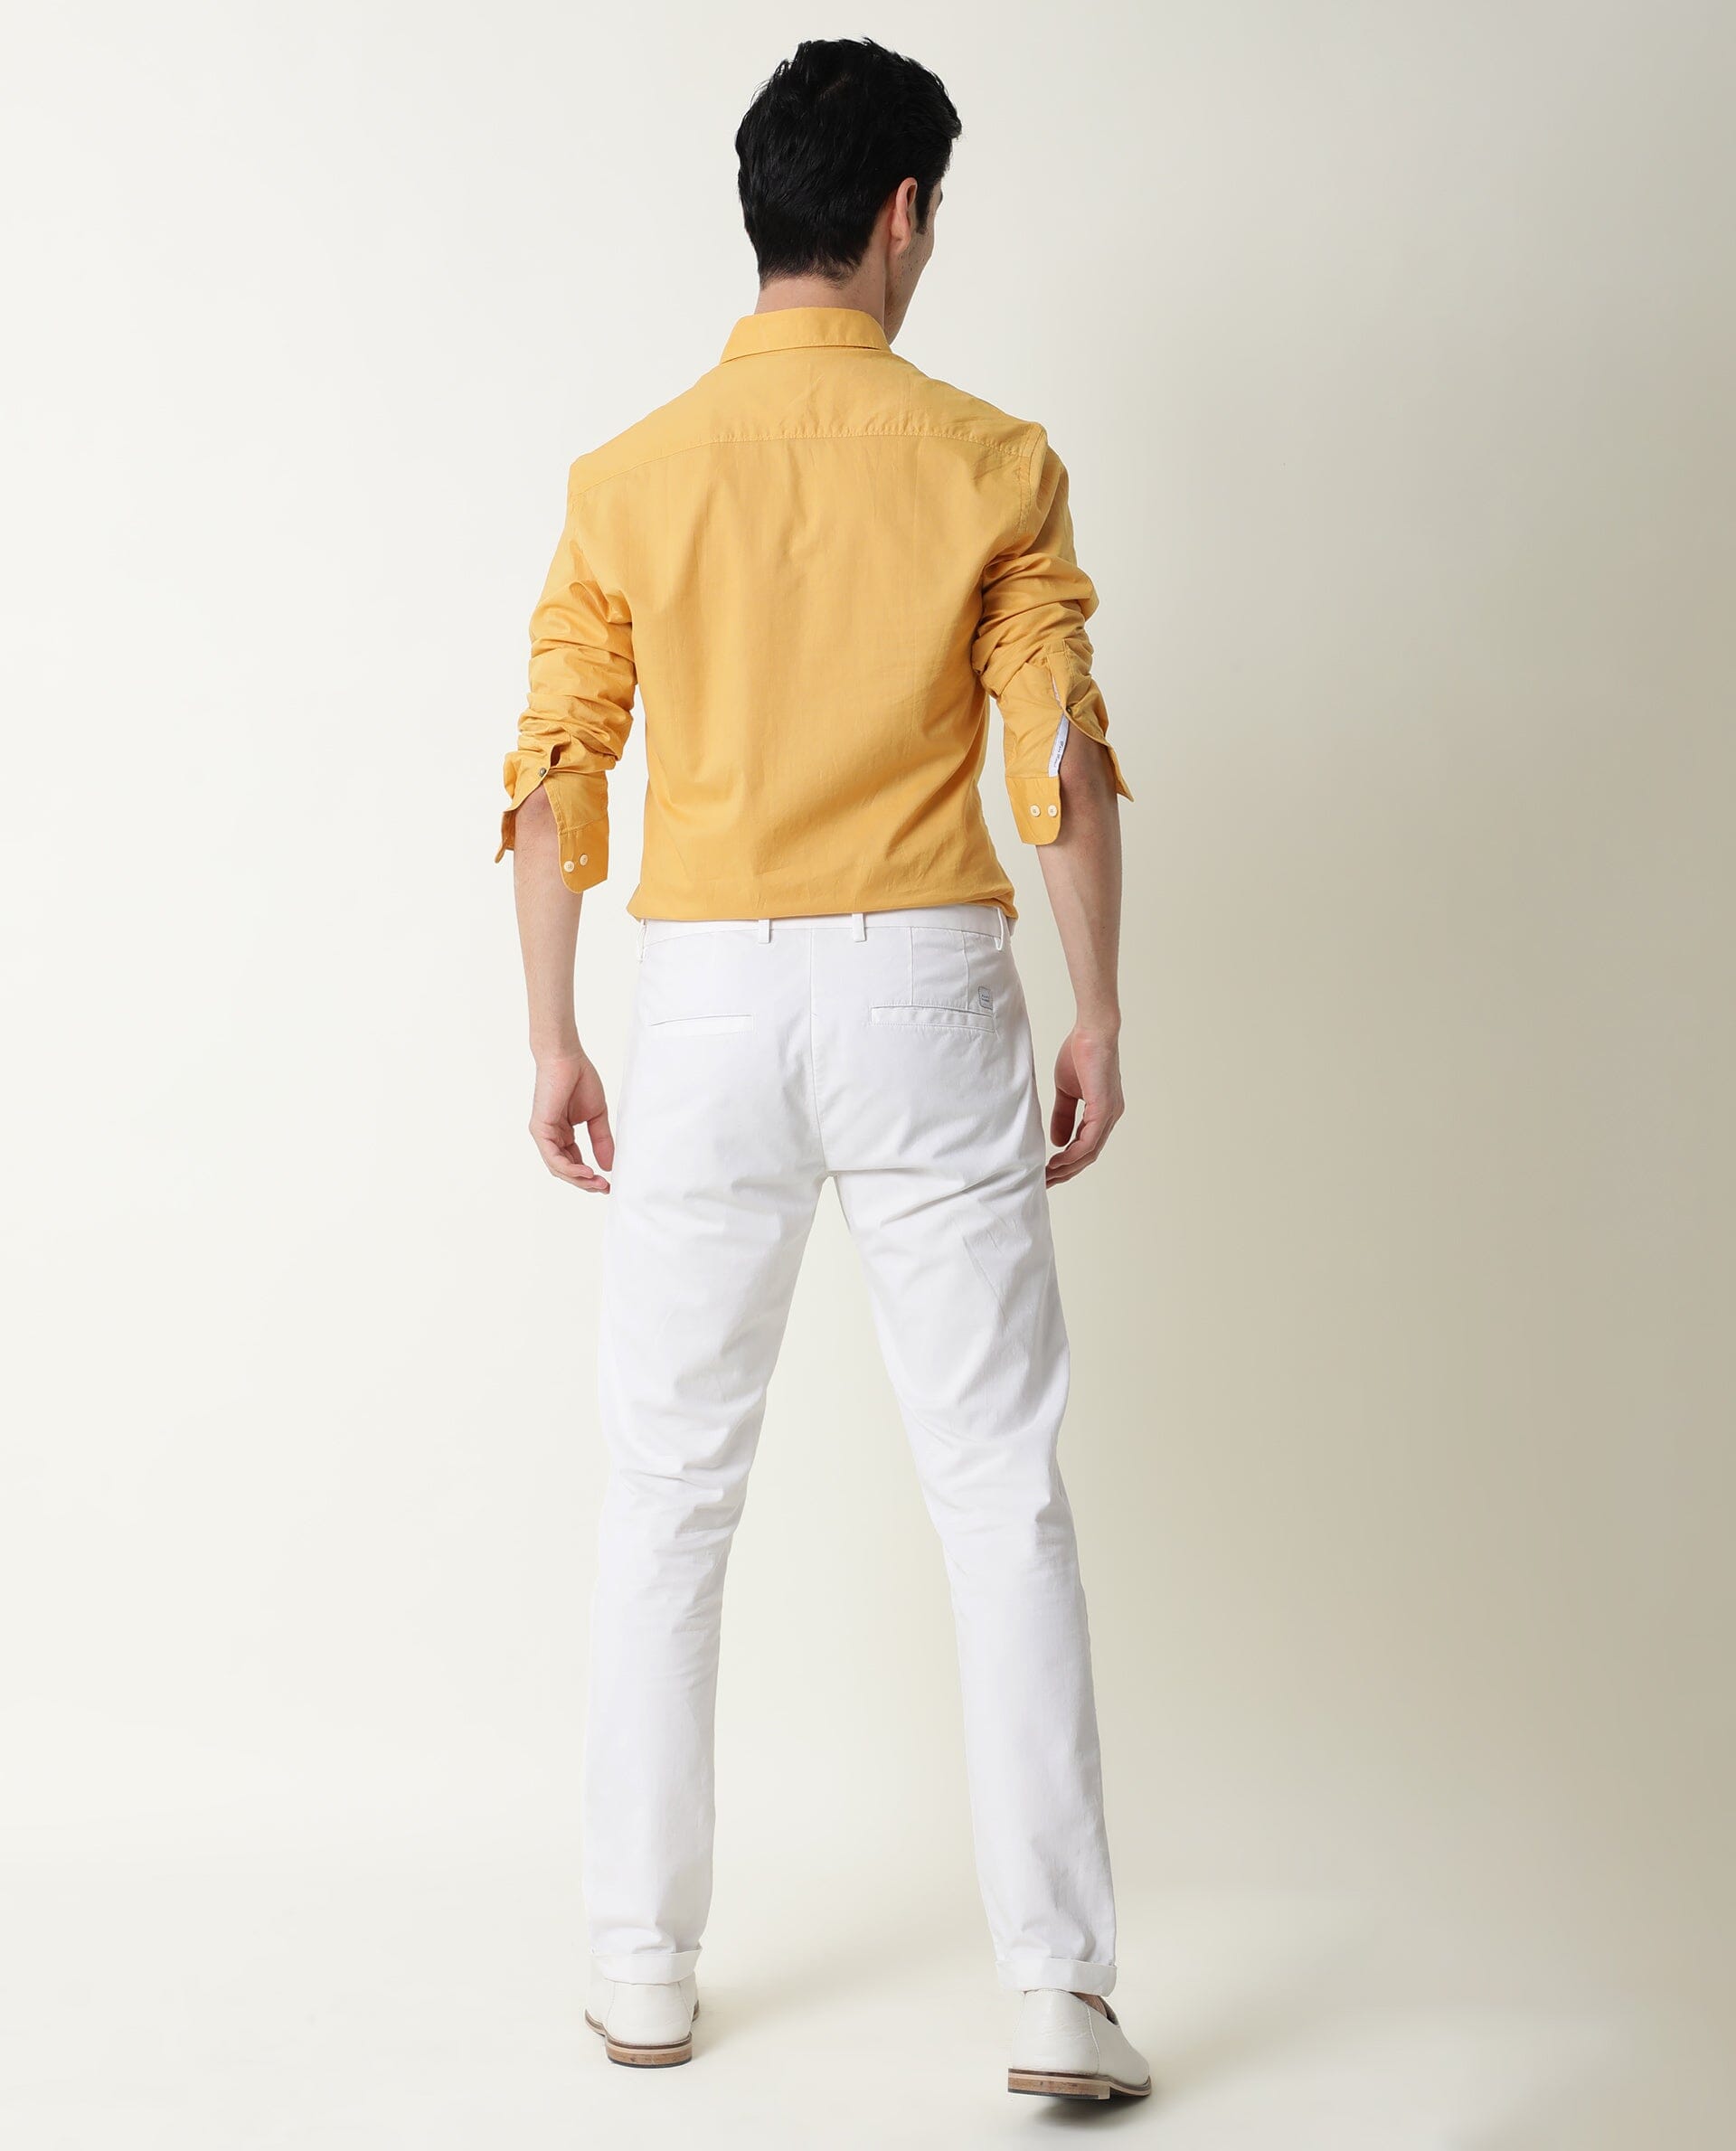 35 Best Men's Outfits with Mustard Pants To Wear This Year